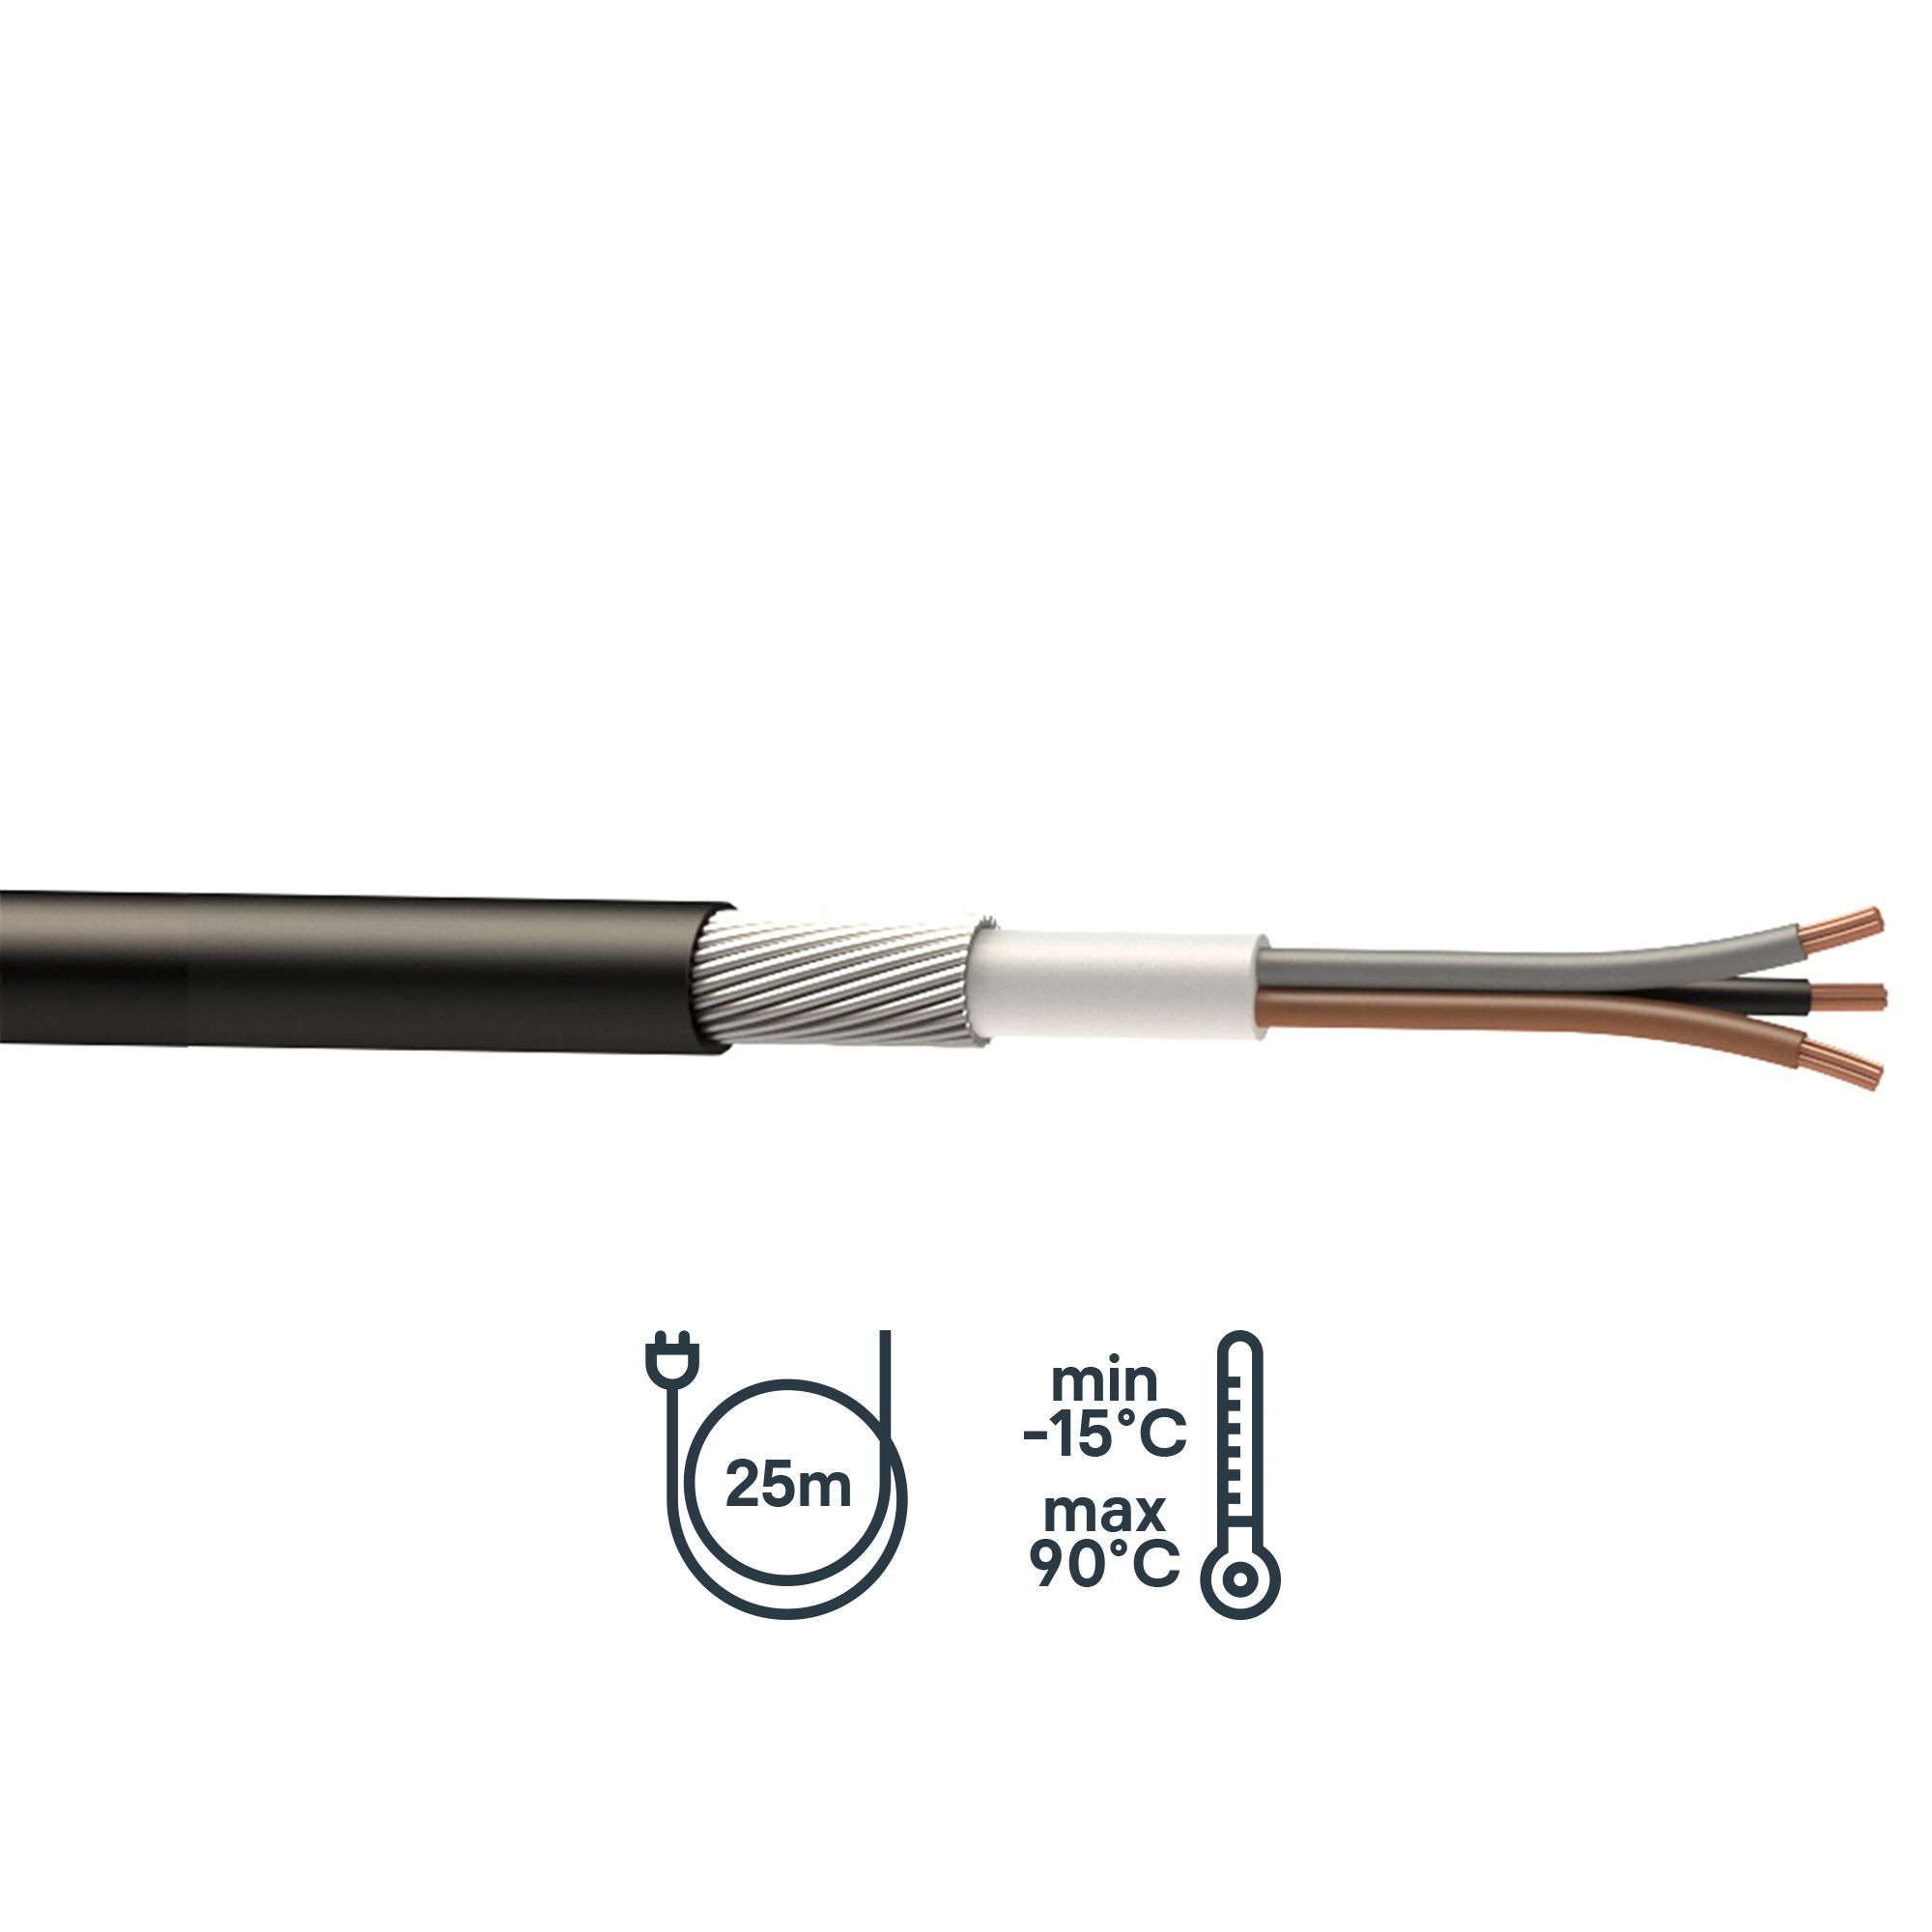 Prysmian Black 3-core Armoured Cable 2.5mm² x 25m